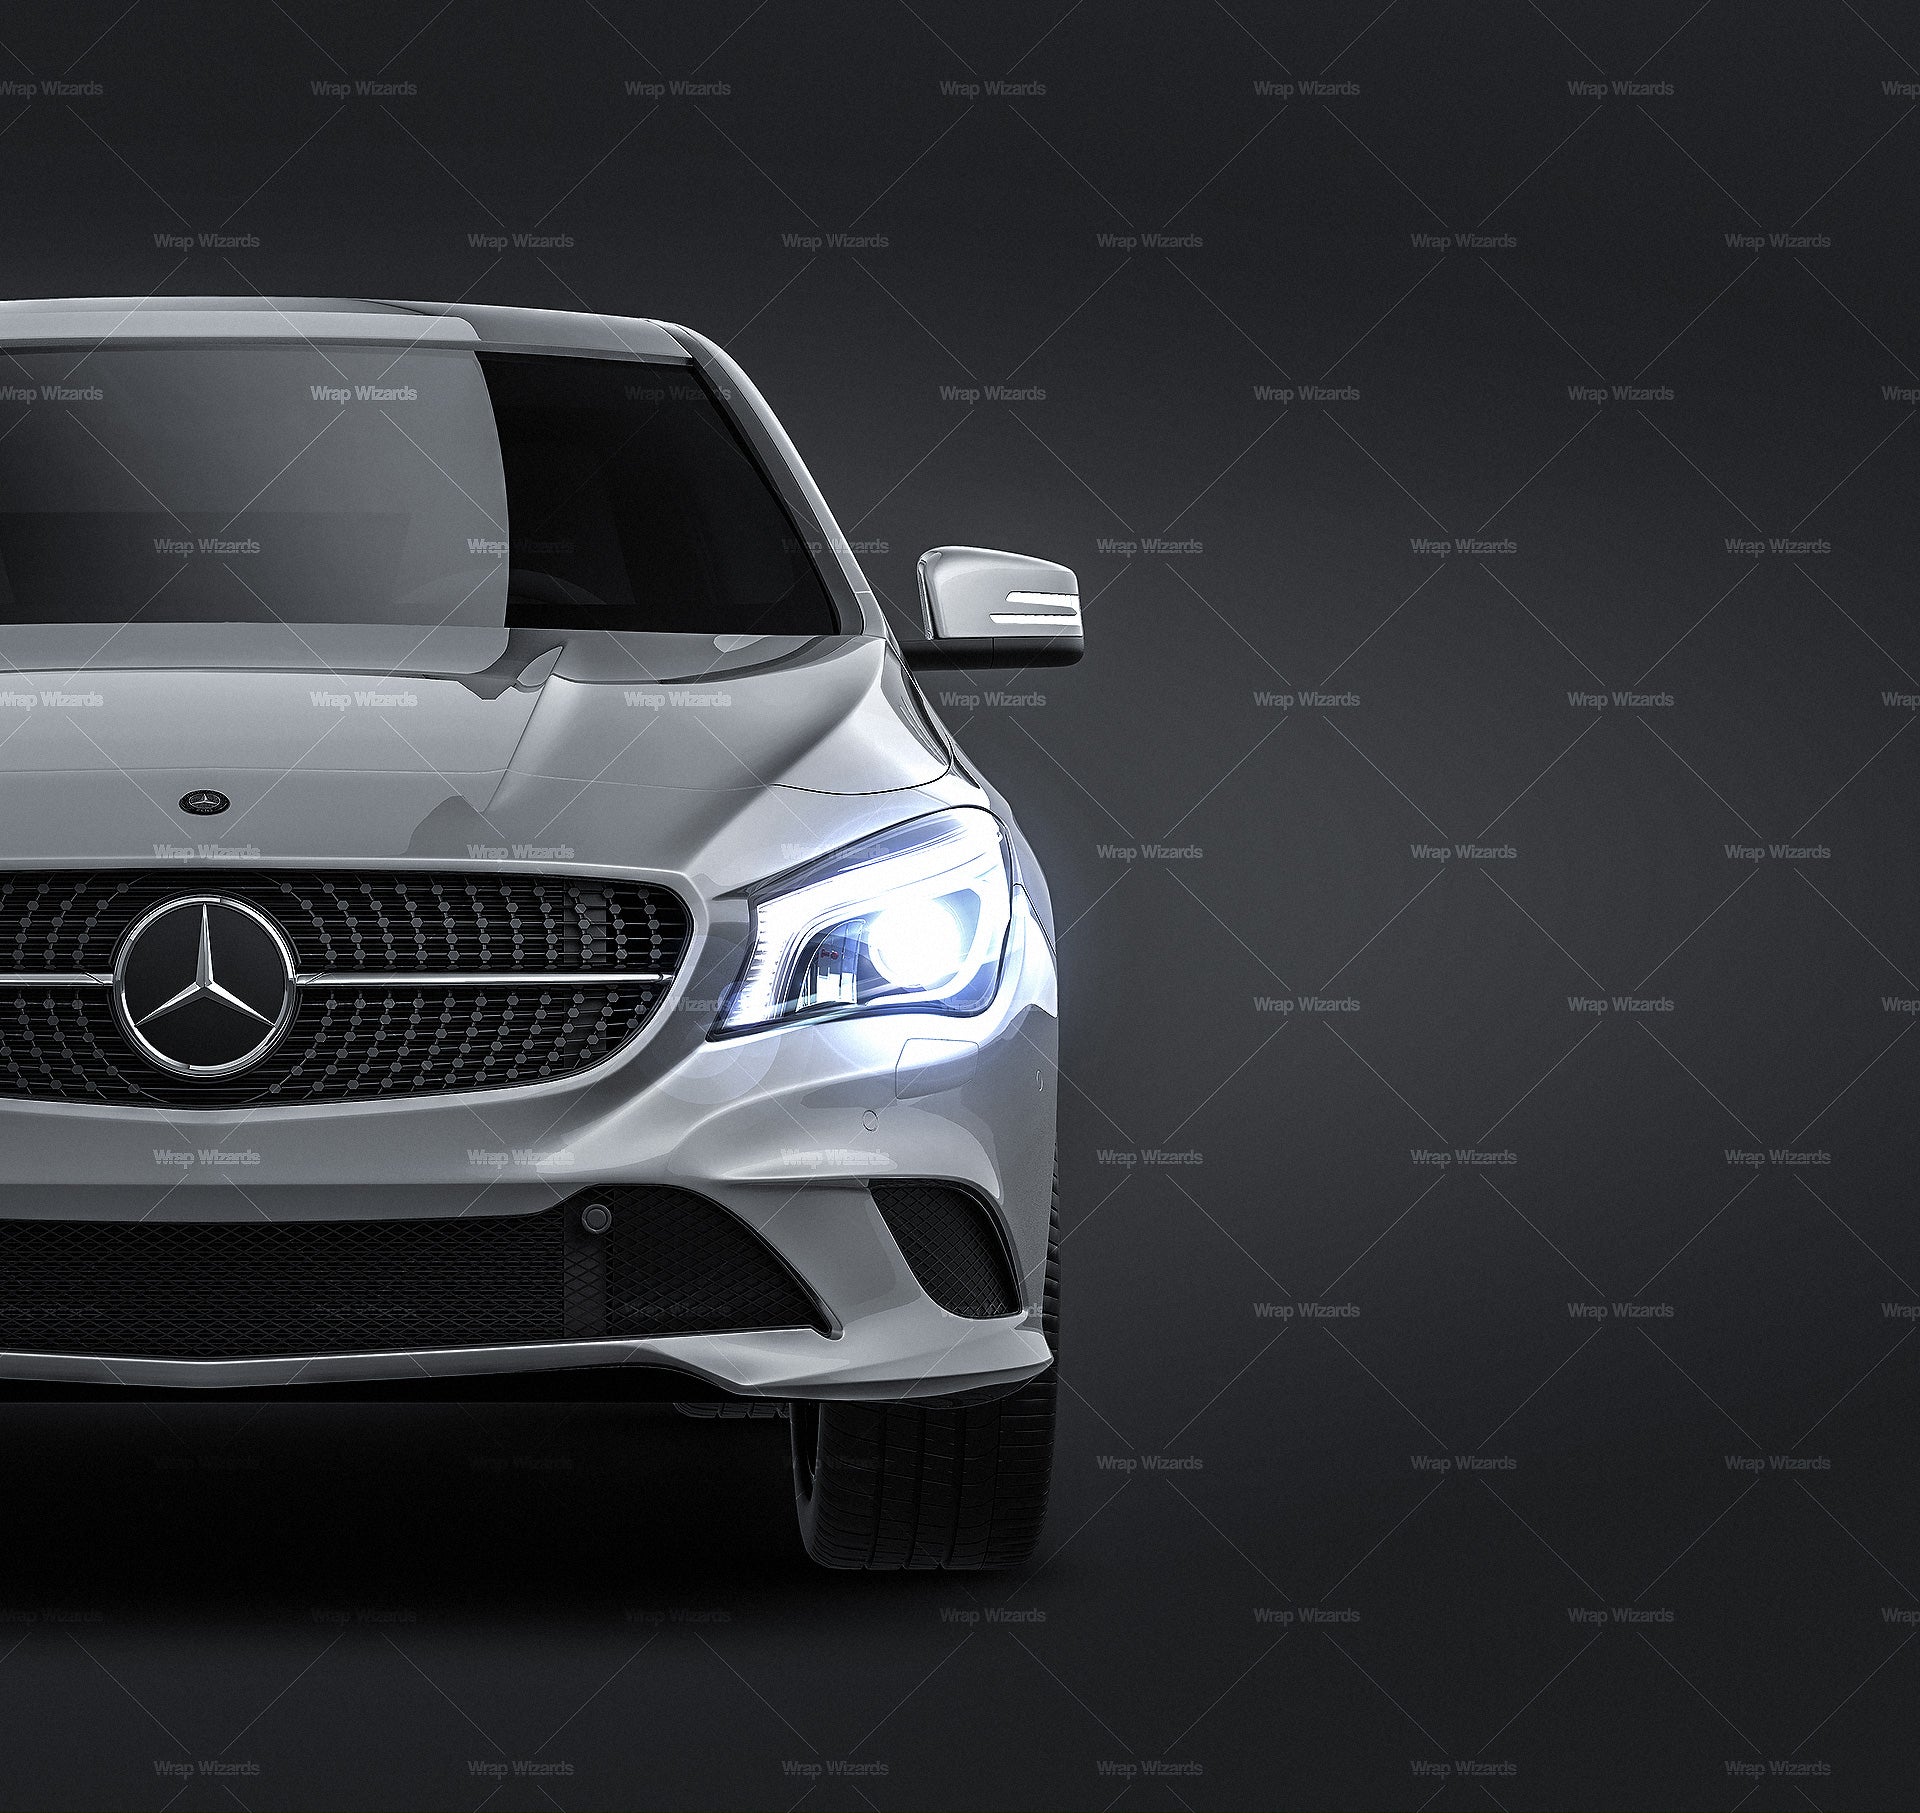 Mercedes-Benz CLA Shooting Brake 2016 glossy finish - all sides Car Mockup Template.psd